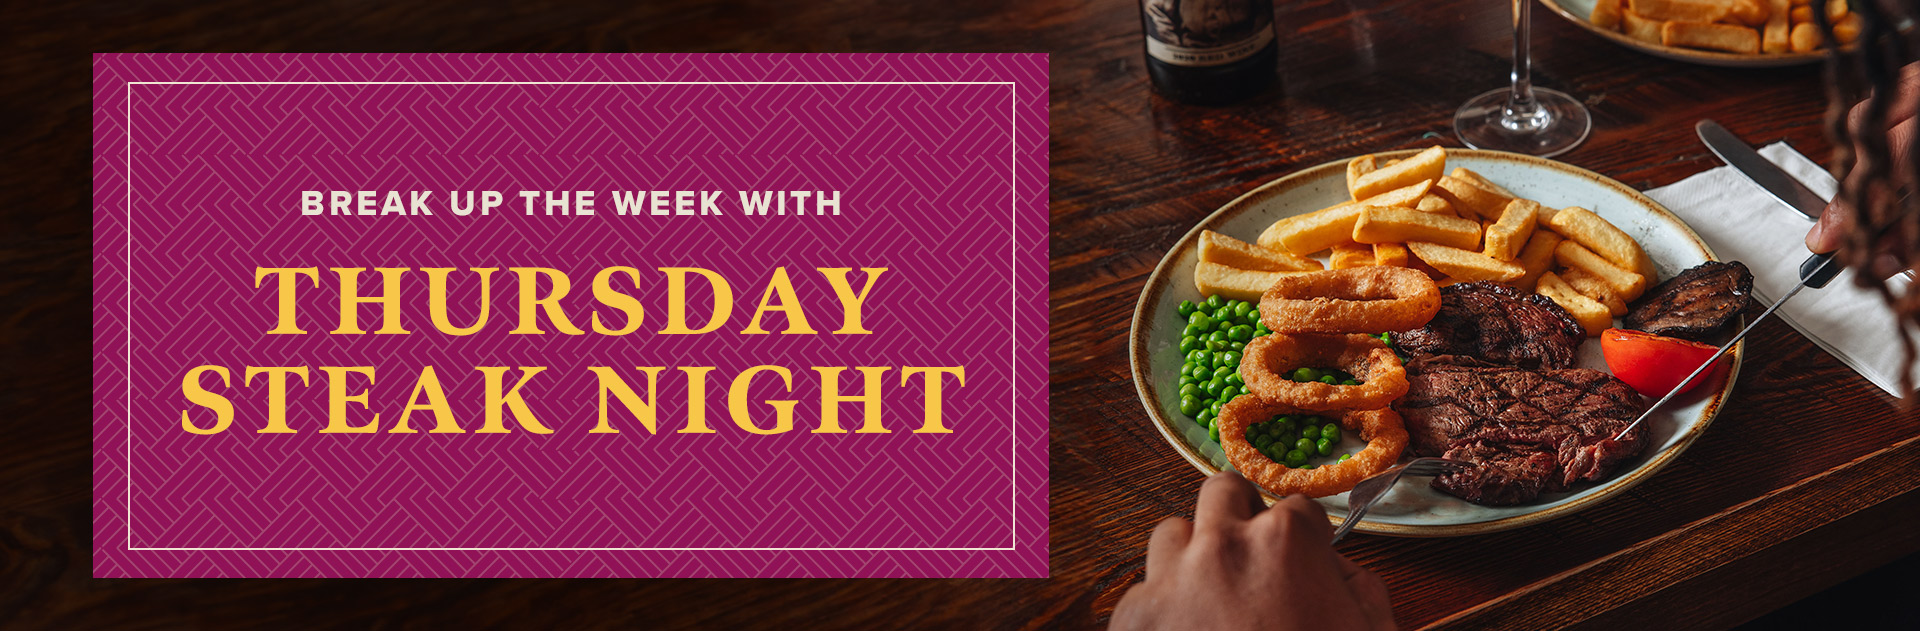 Thursday Steak Night at The Essex Arms